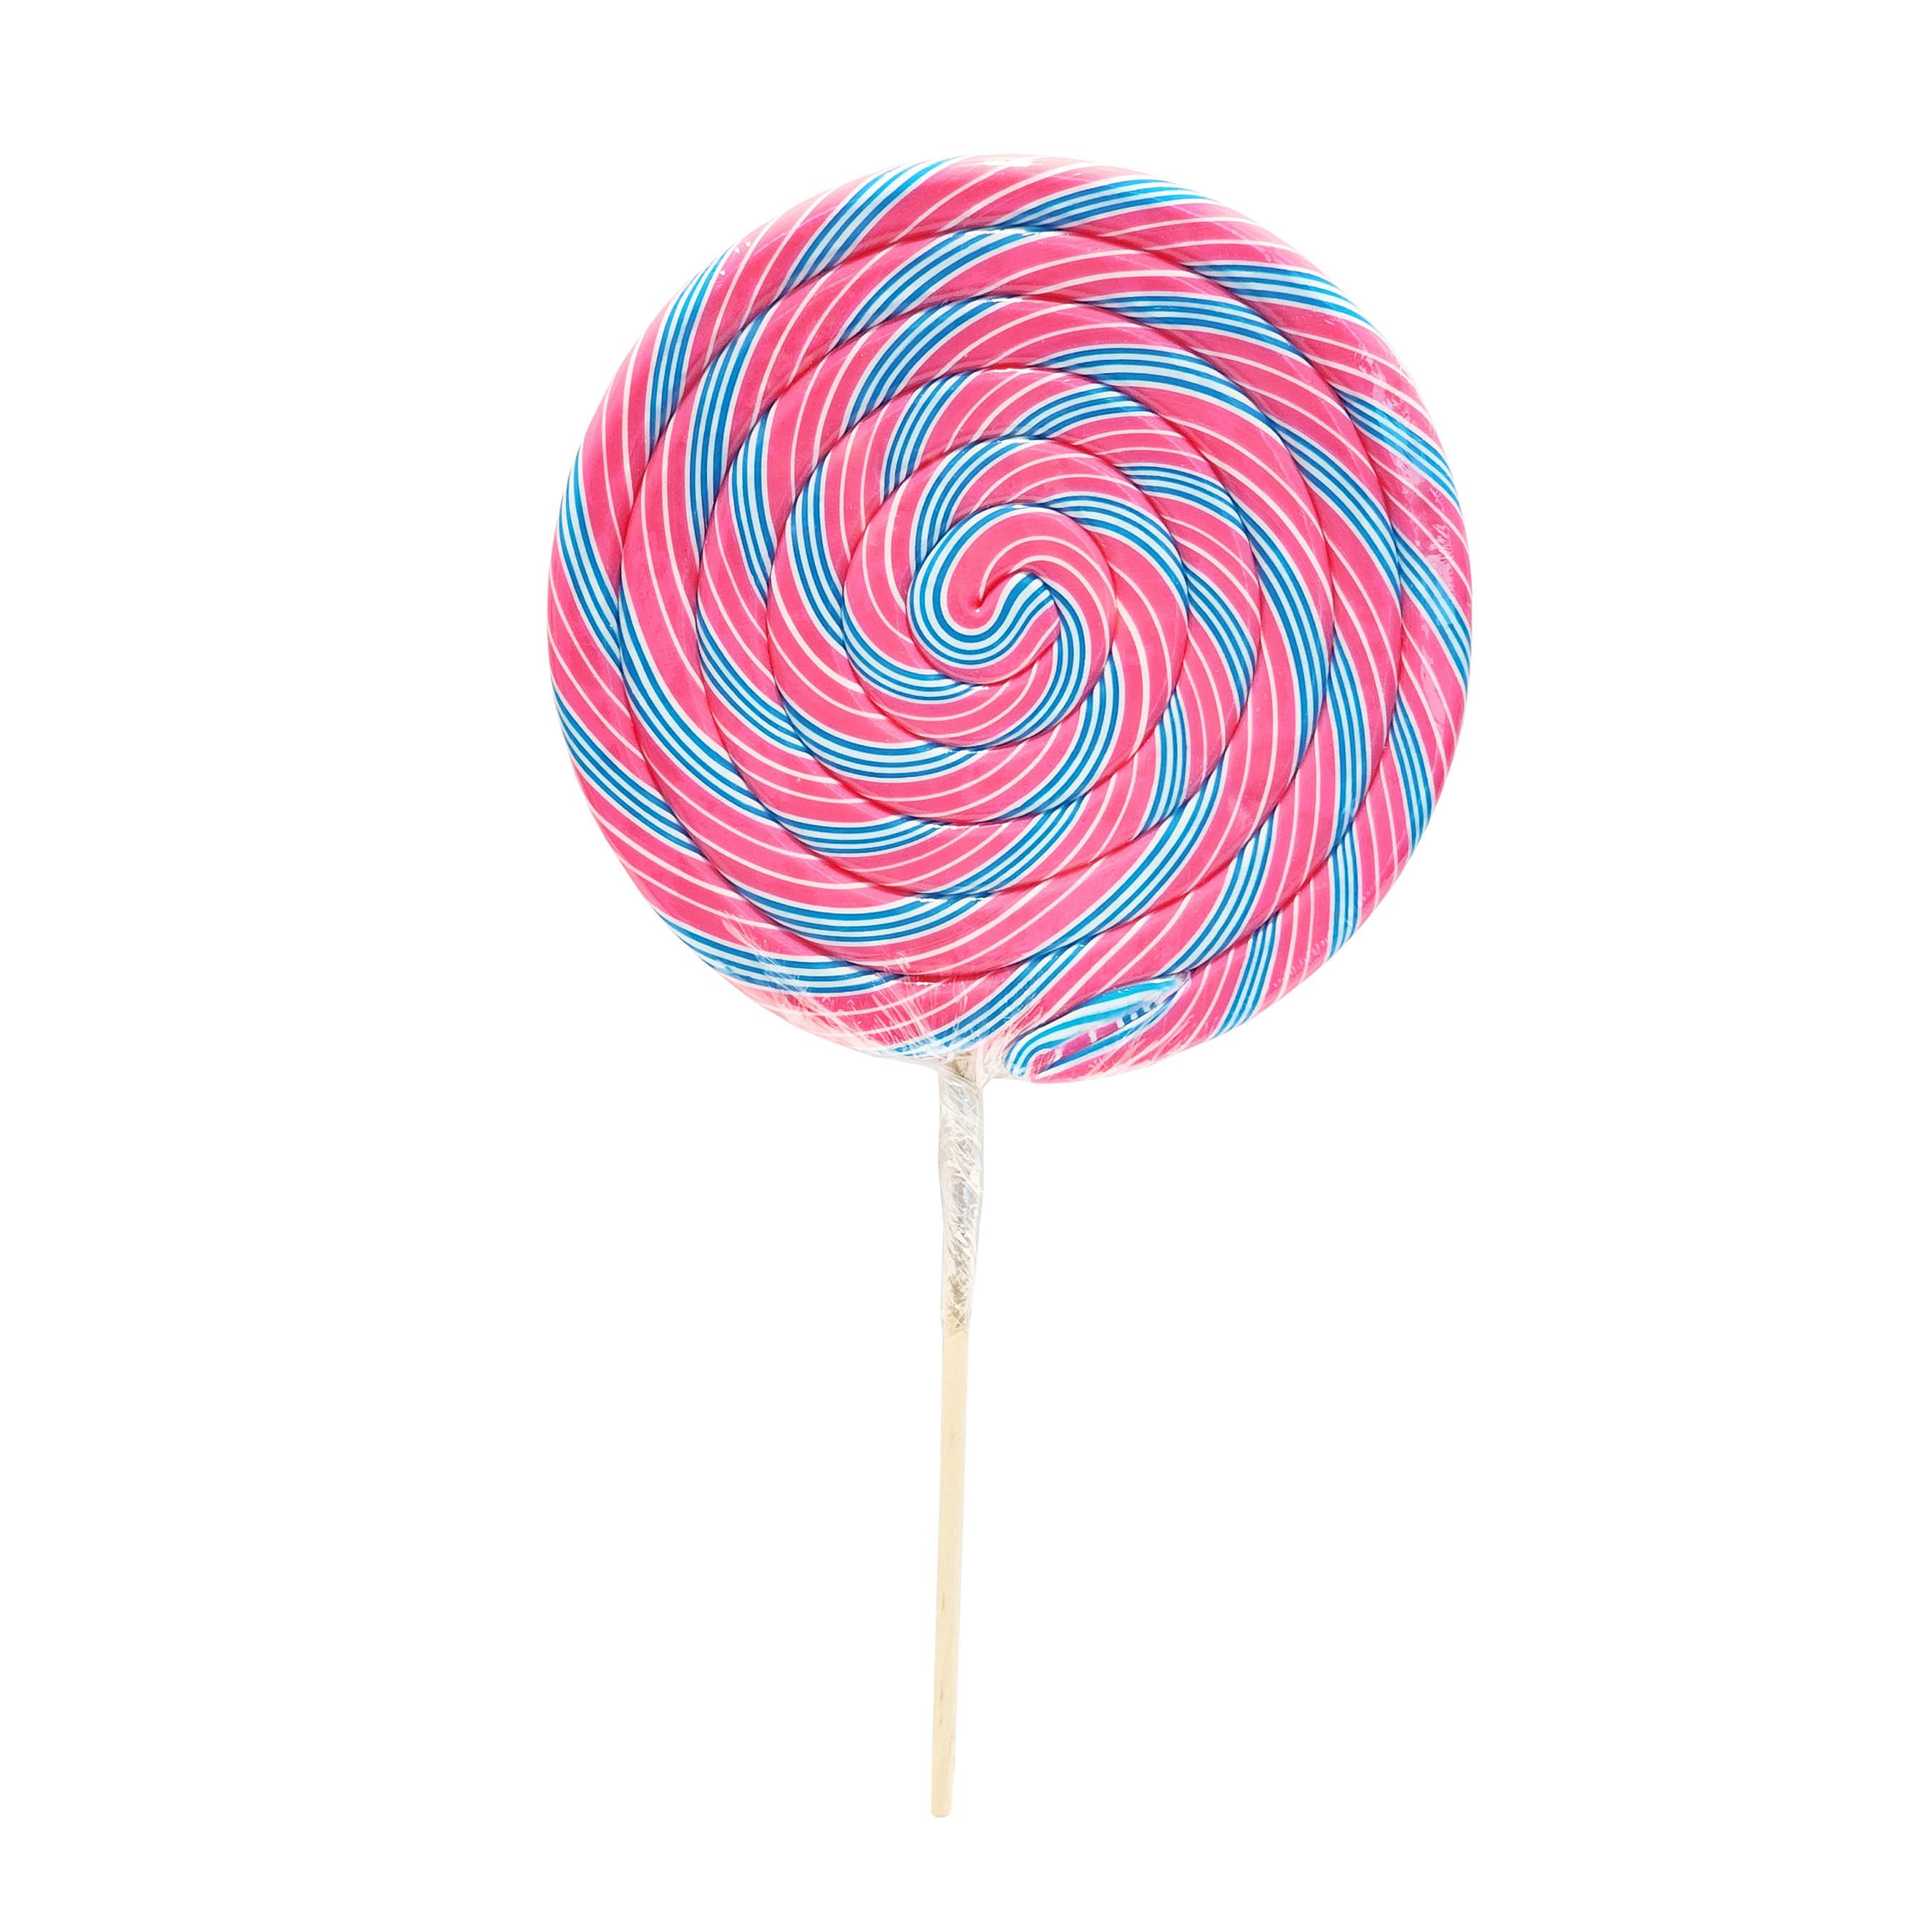 Bubblegum flavored extra large swhirly sweet whirls 